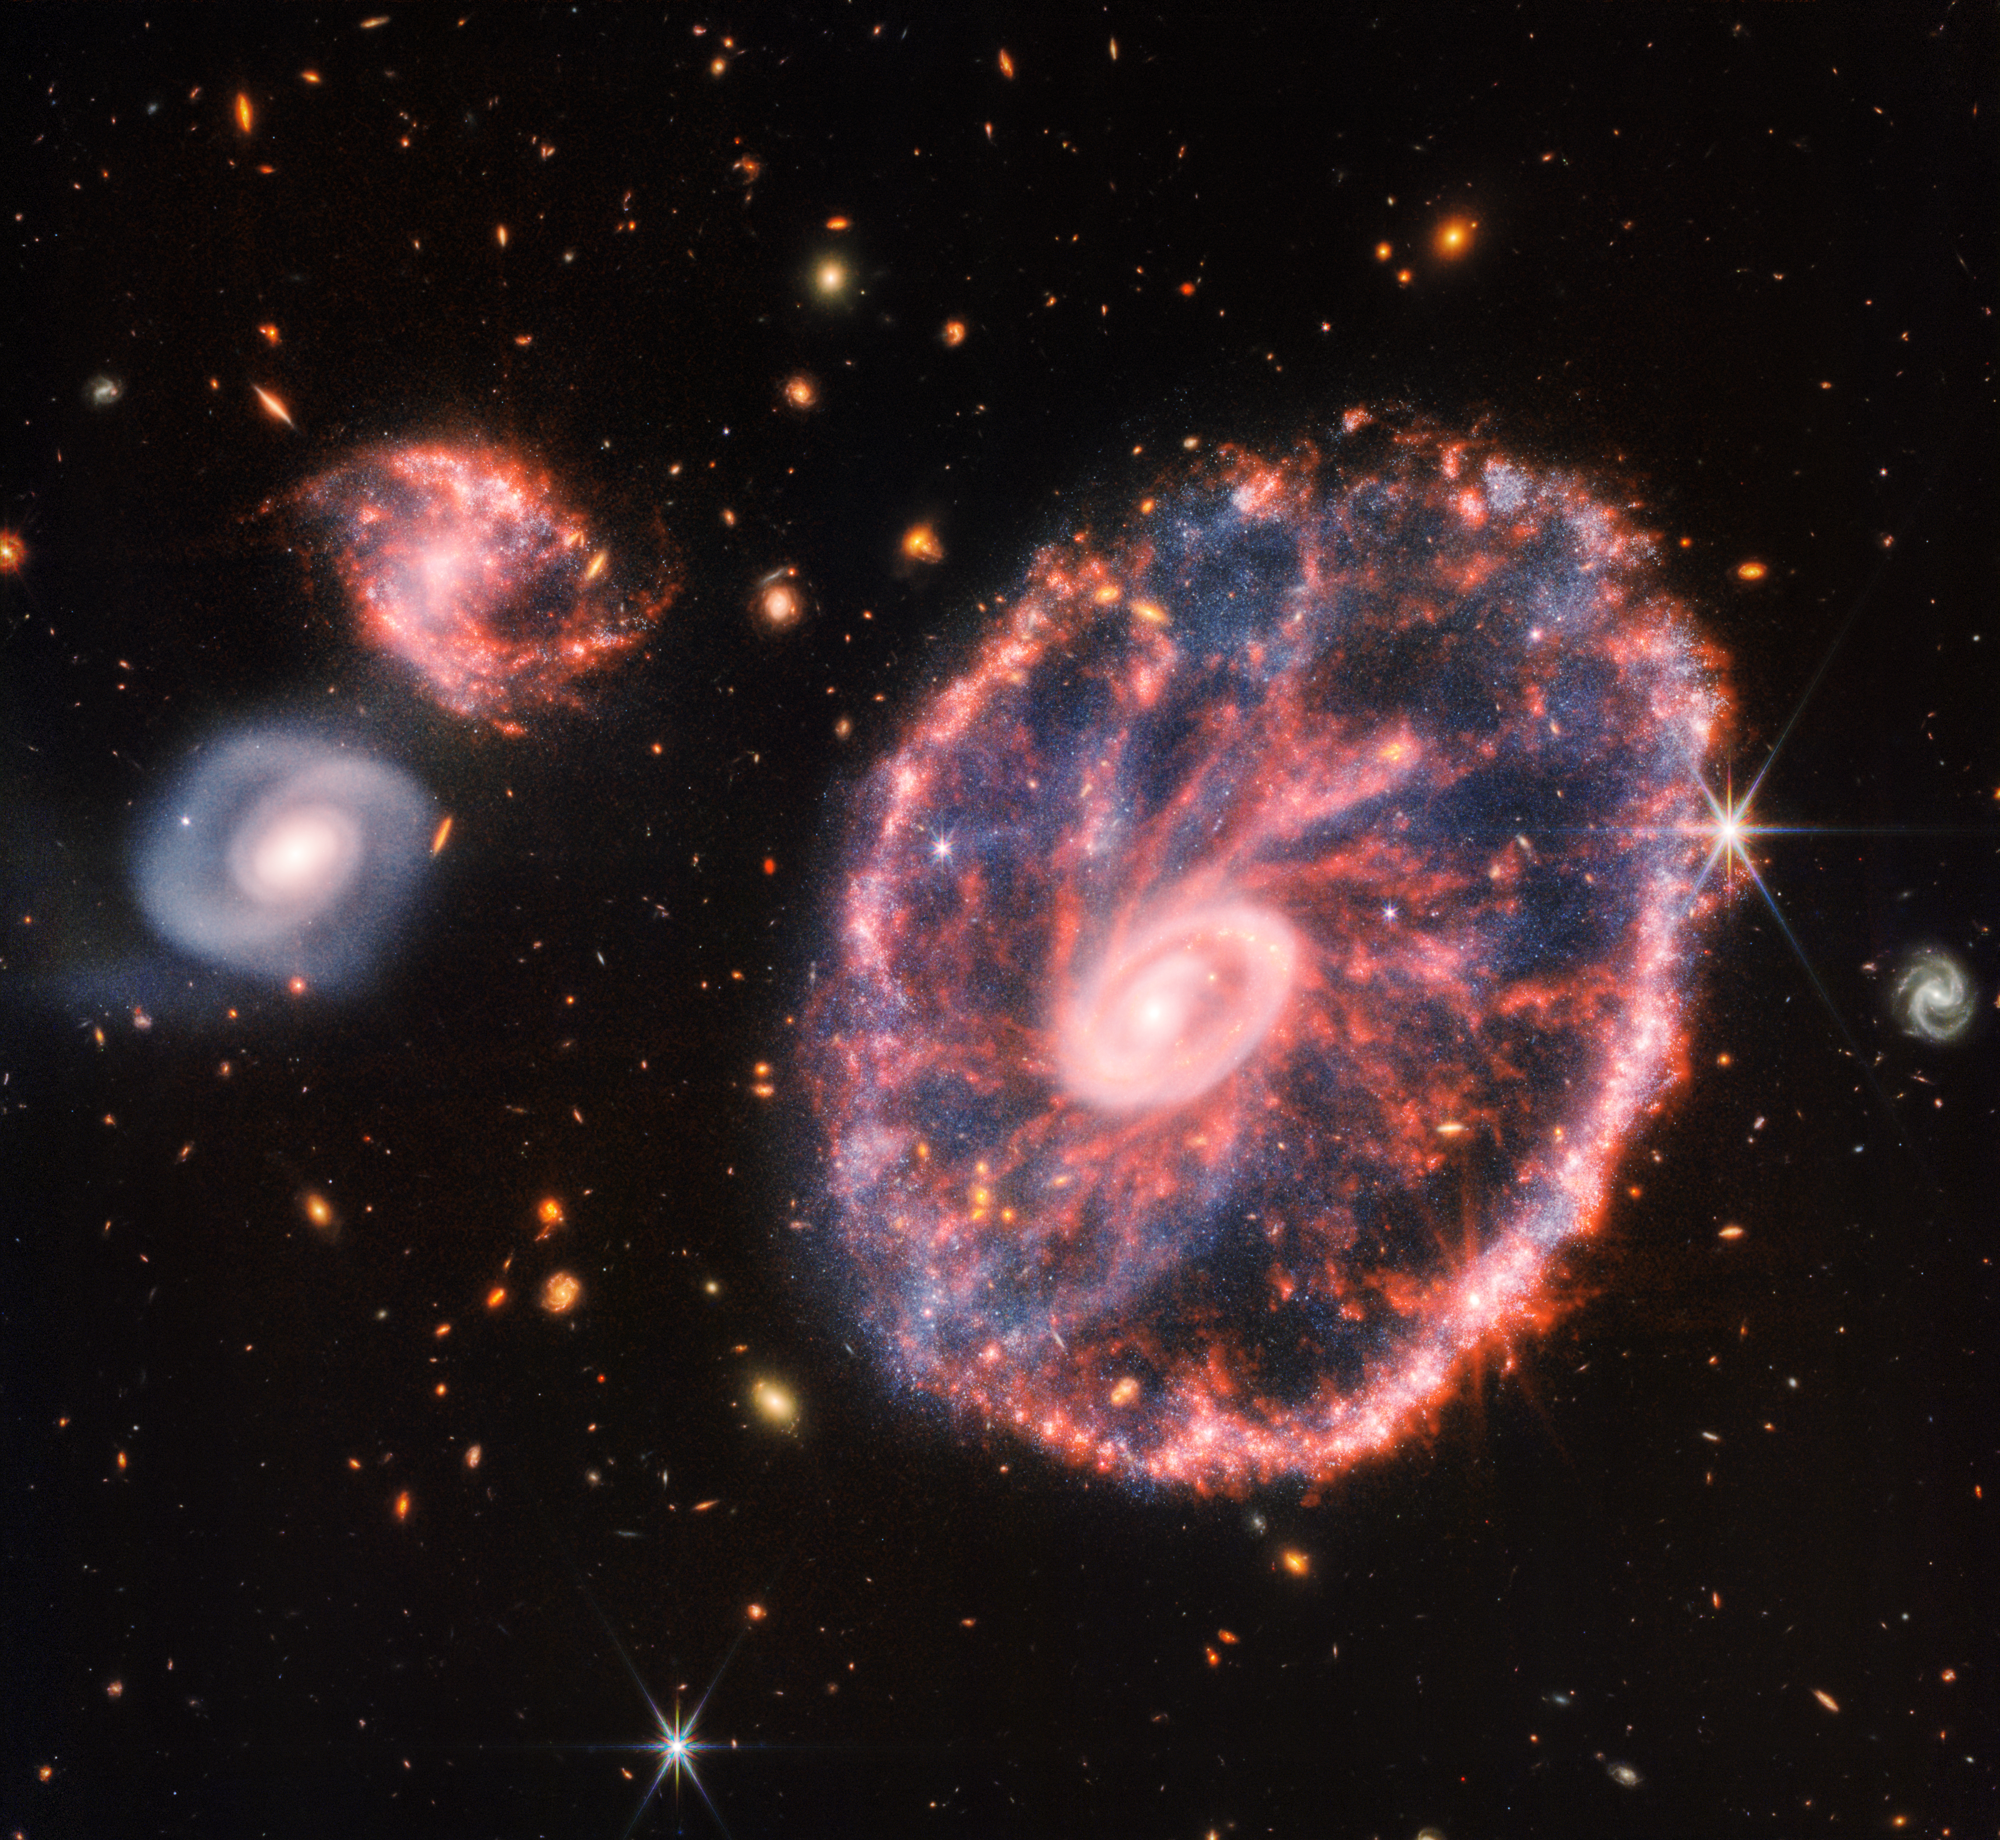 A large pink, speckled galaxy resembling a wheel with a small, inner oval, with dusty blue in between on the right. Two smaller spiral galaxies about the same size are to the left, all against a black background.